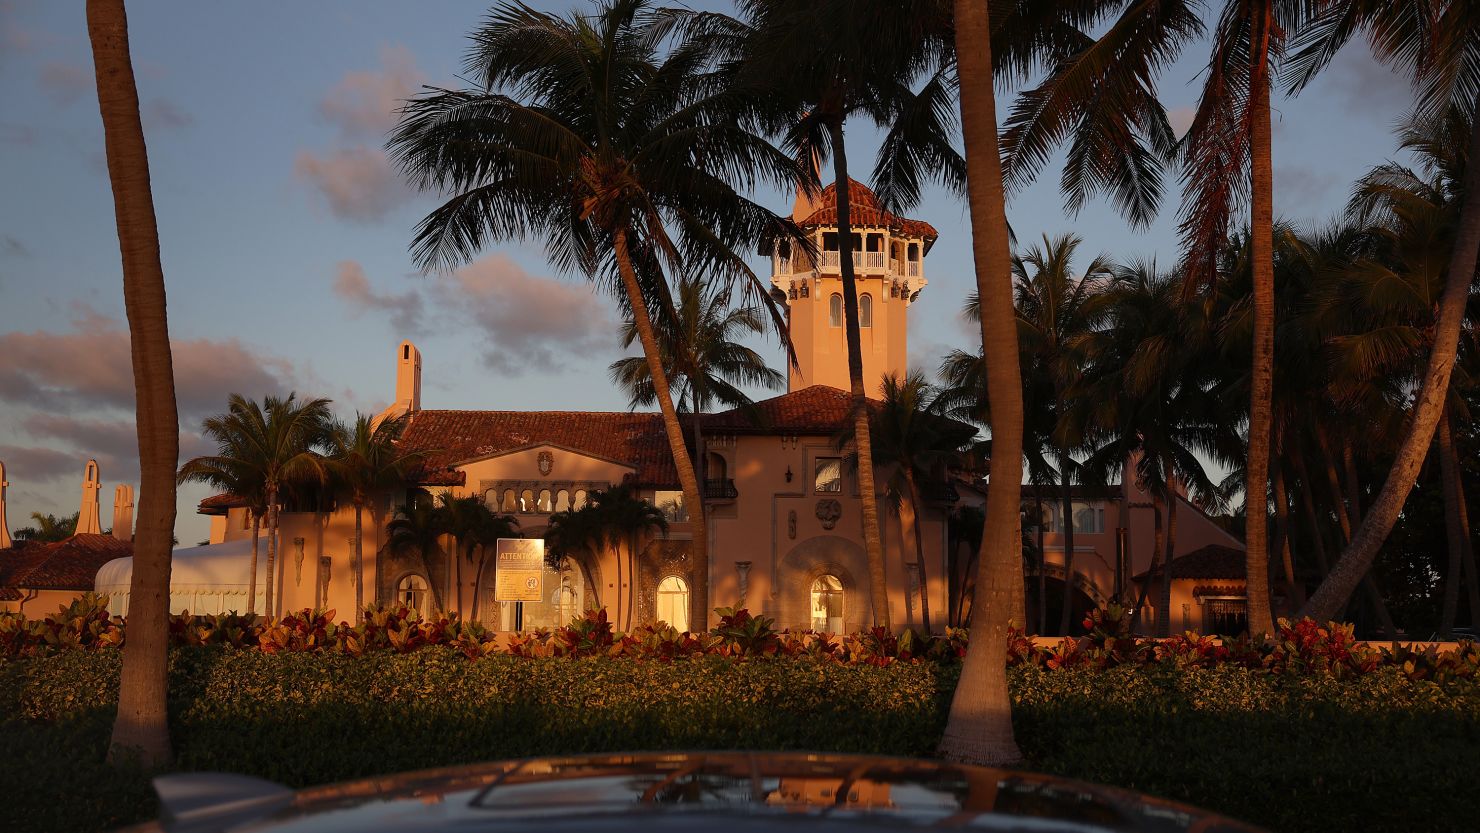 The exterior of former President Donald Trump's Mar-a-Lago home is seen on March 23, 2023 in Palm Beach, Florida.